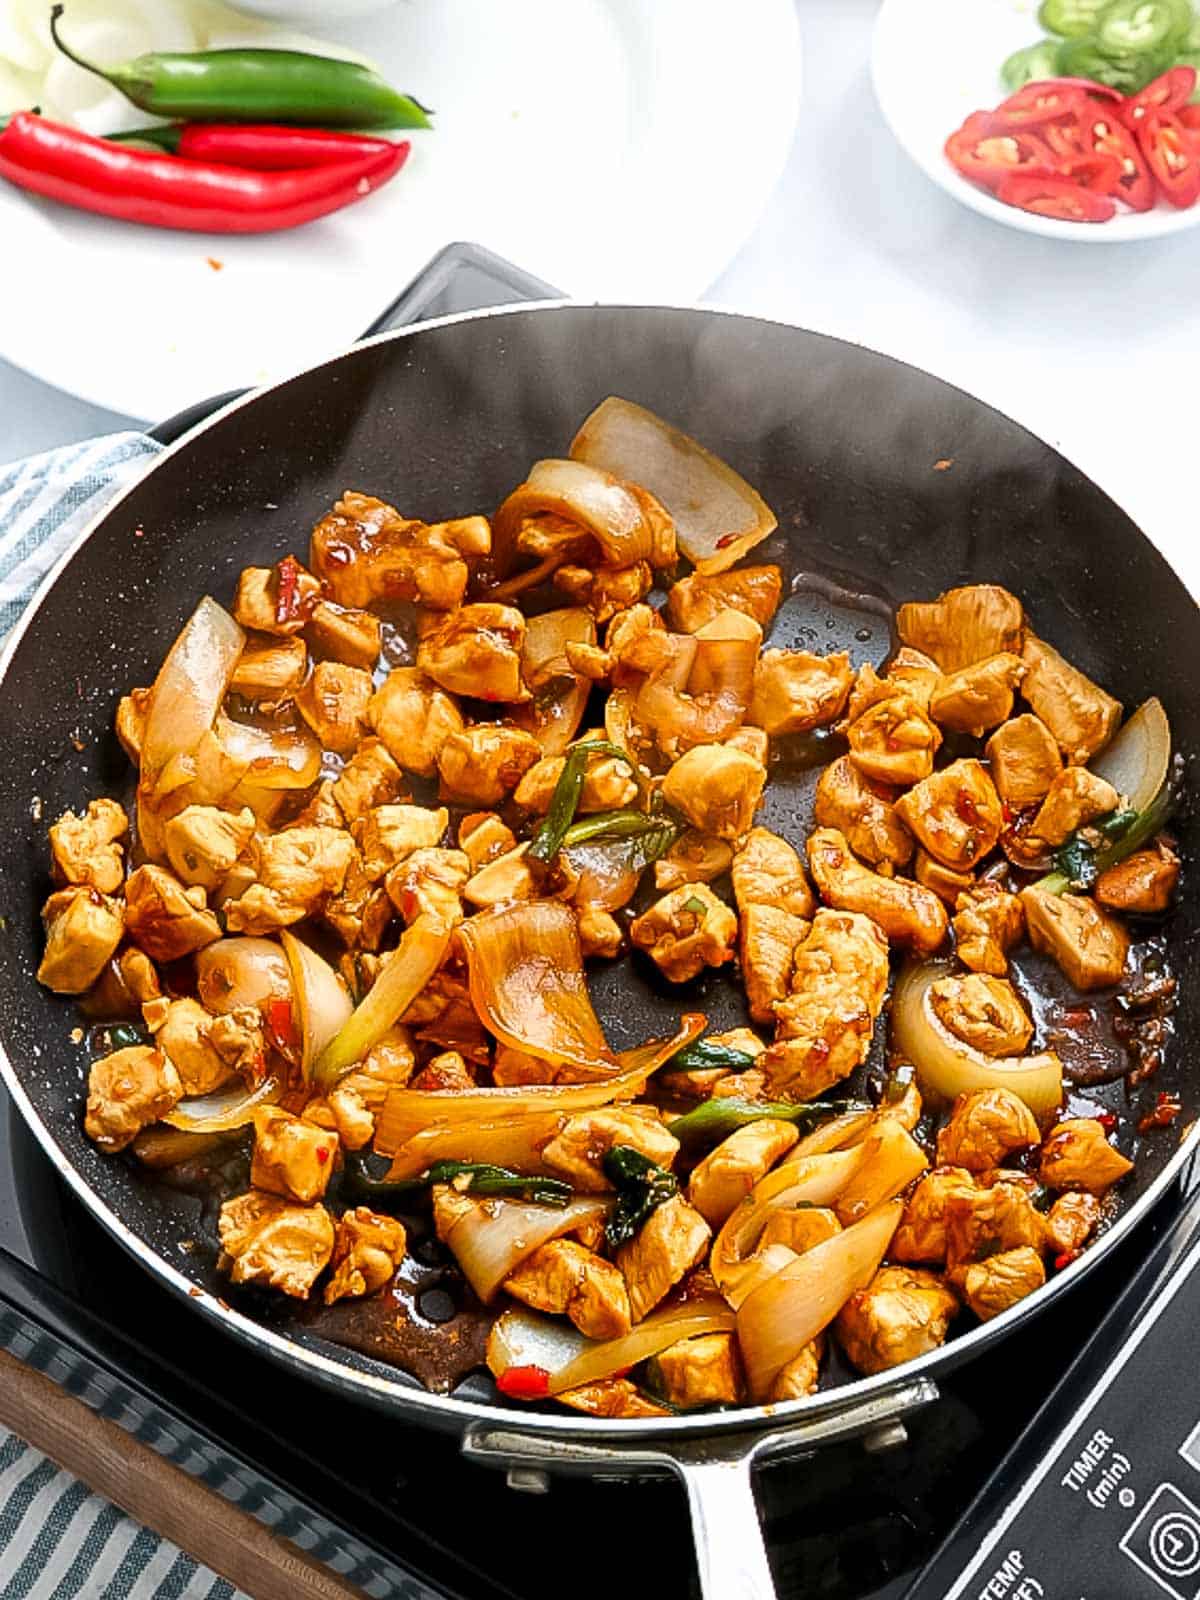 Chicken stir frying in a pan with sauce.